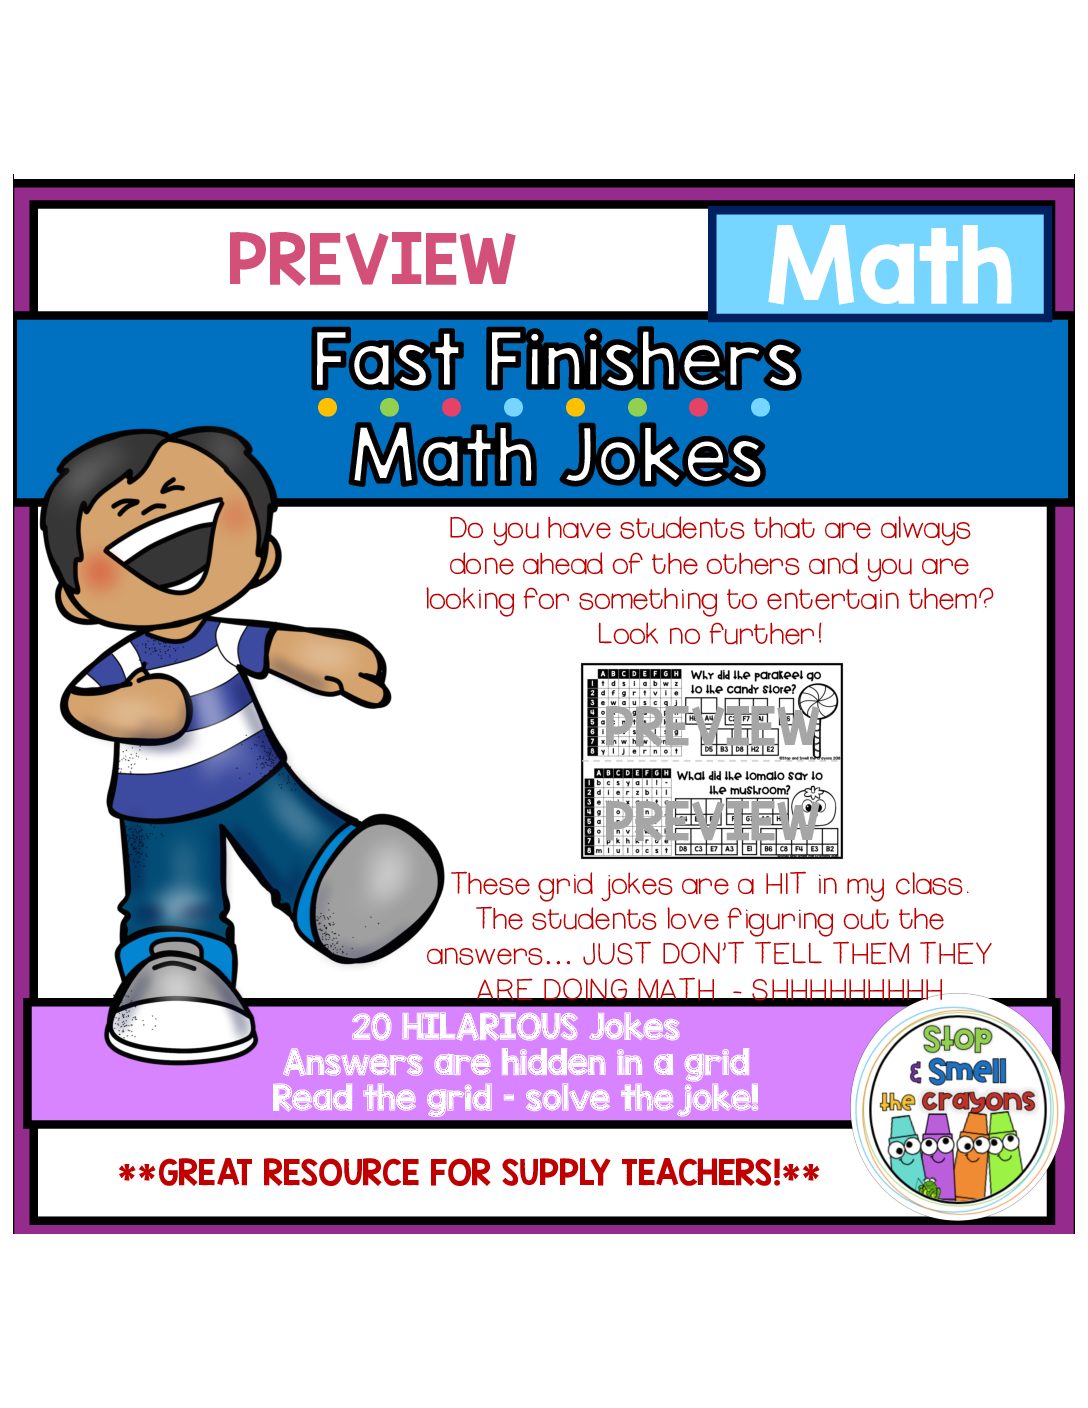 fast-finishers-math-jokes-reading-a-grid-stop-and-smell-the-crayons